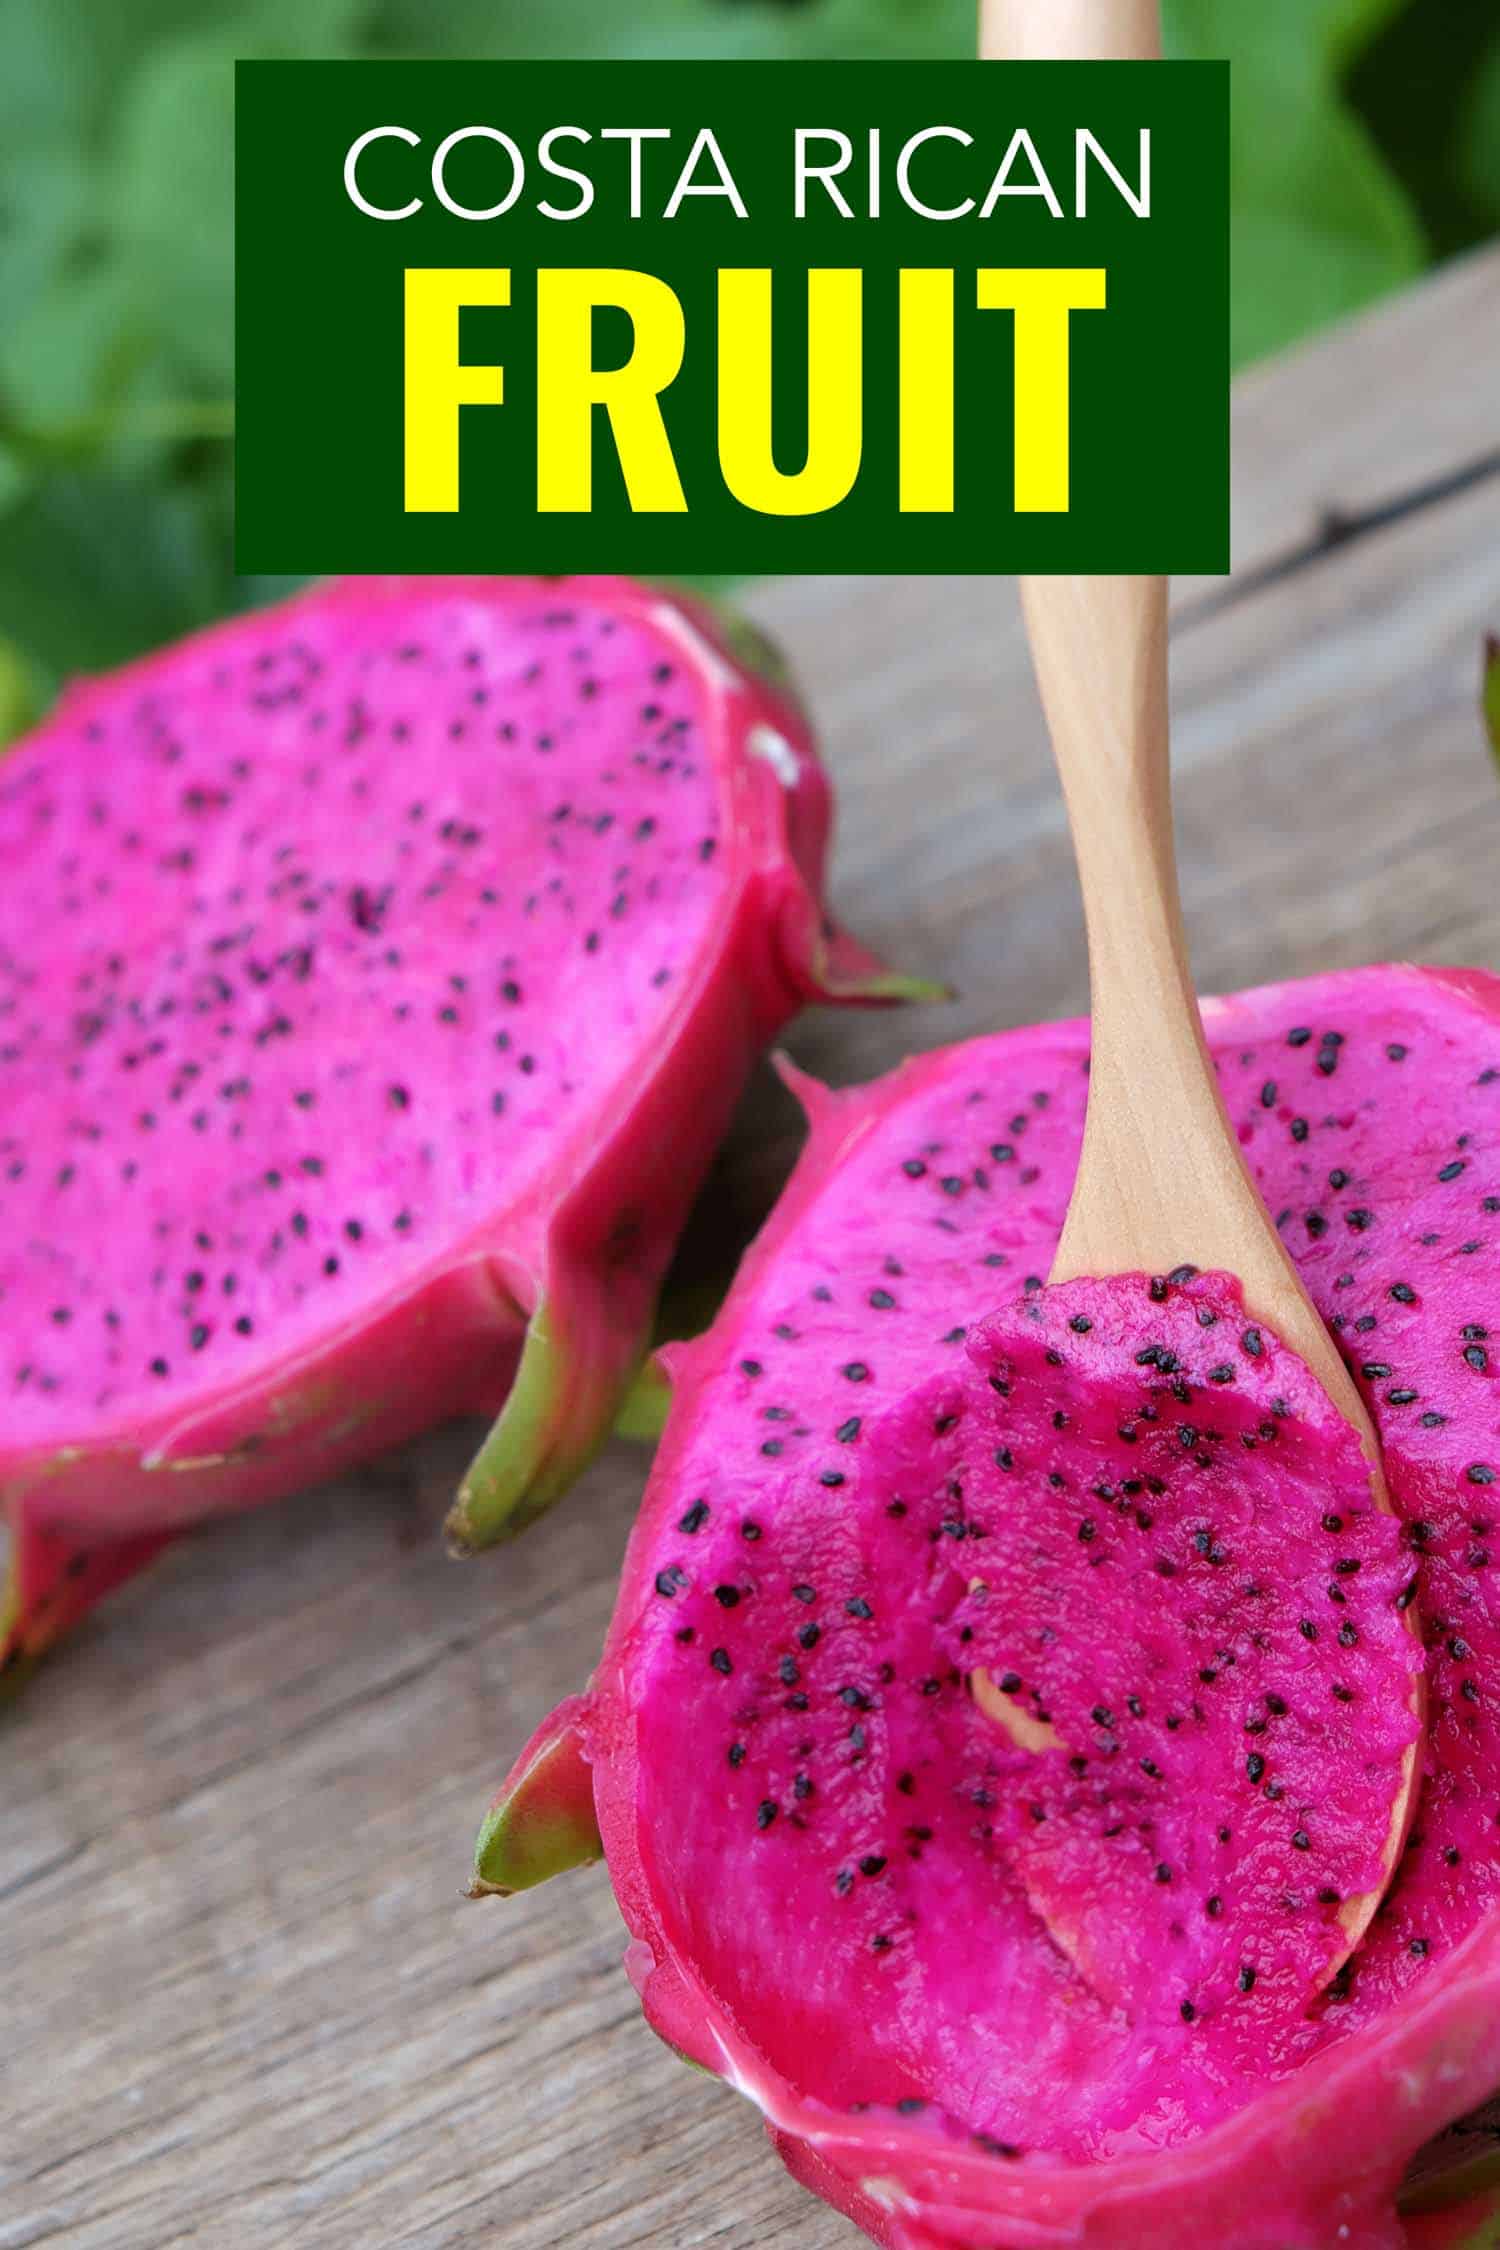 Costa Rican fruit include red dragon fruit.